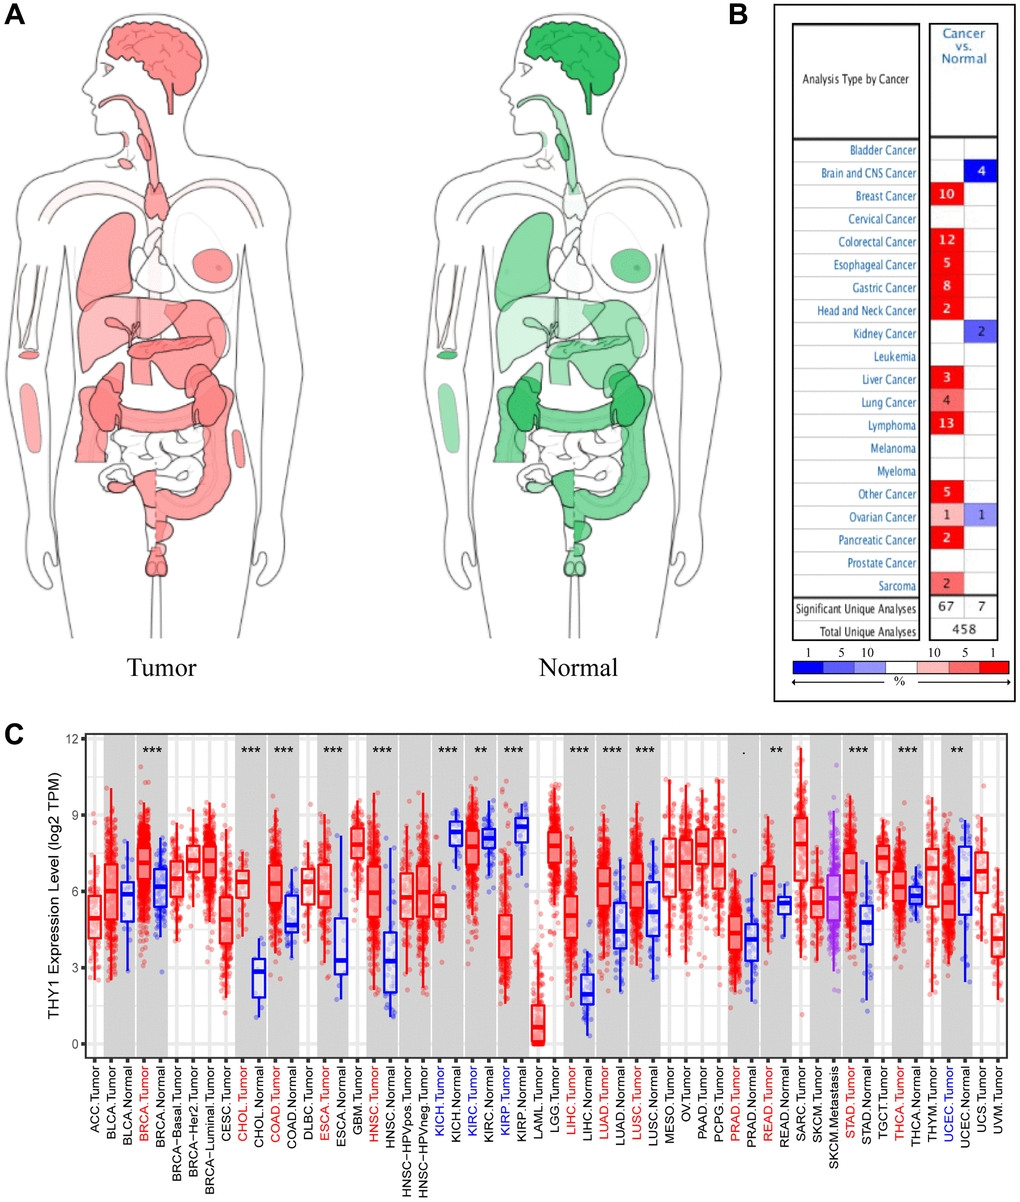 Differentially expressed THY1 in a variety of cancers and normal tissues. (A) The interactive body-map revealed the median expression of THY1 in tumor (red) and normal samples (green) using GEPIA (scale: Log2 (TPM+1)). (B) The expression levels of THY1 in different tumors compared to normal tissues from ONCOMINE database. (C) The expression levels of THY1 in 33 types of cancers compared to normal tissues from TCGA in TIMER database.